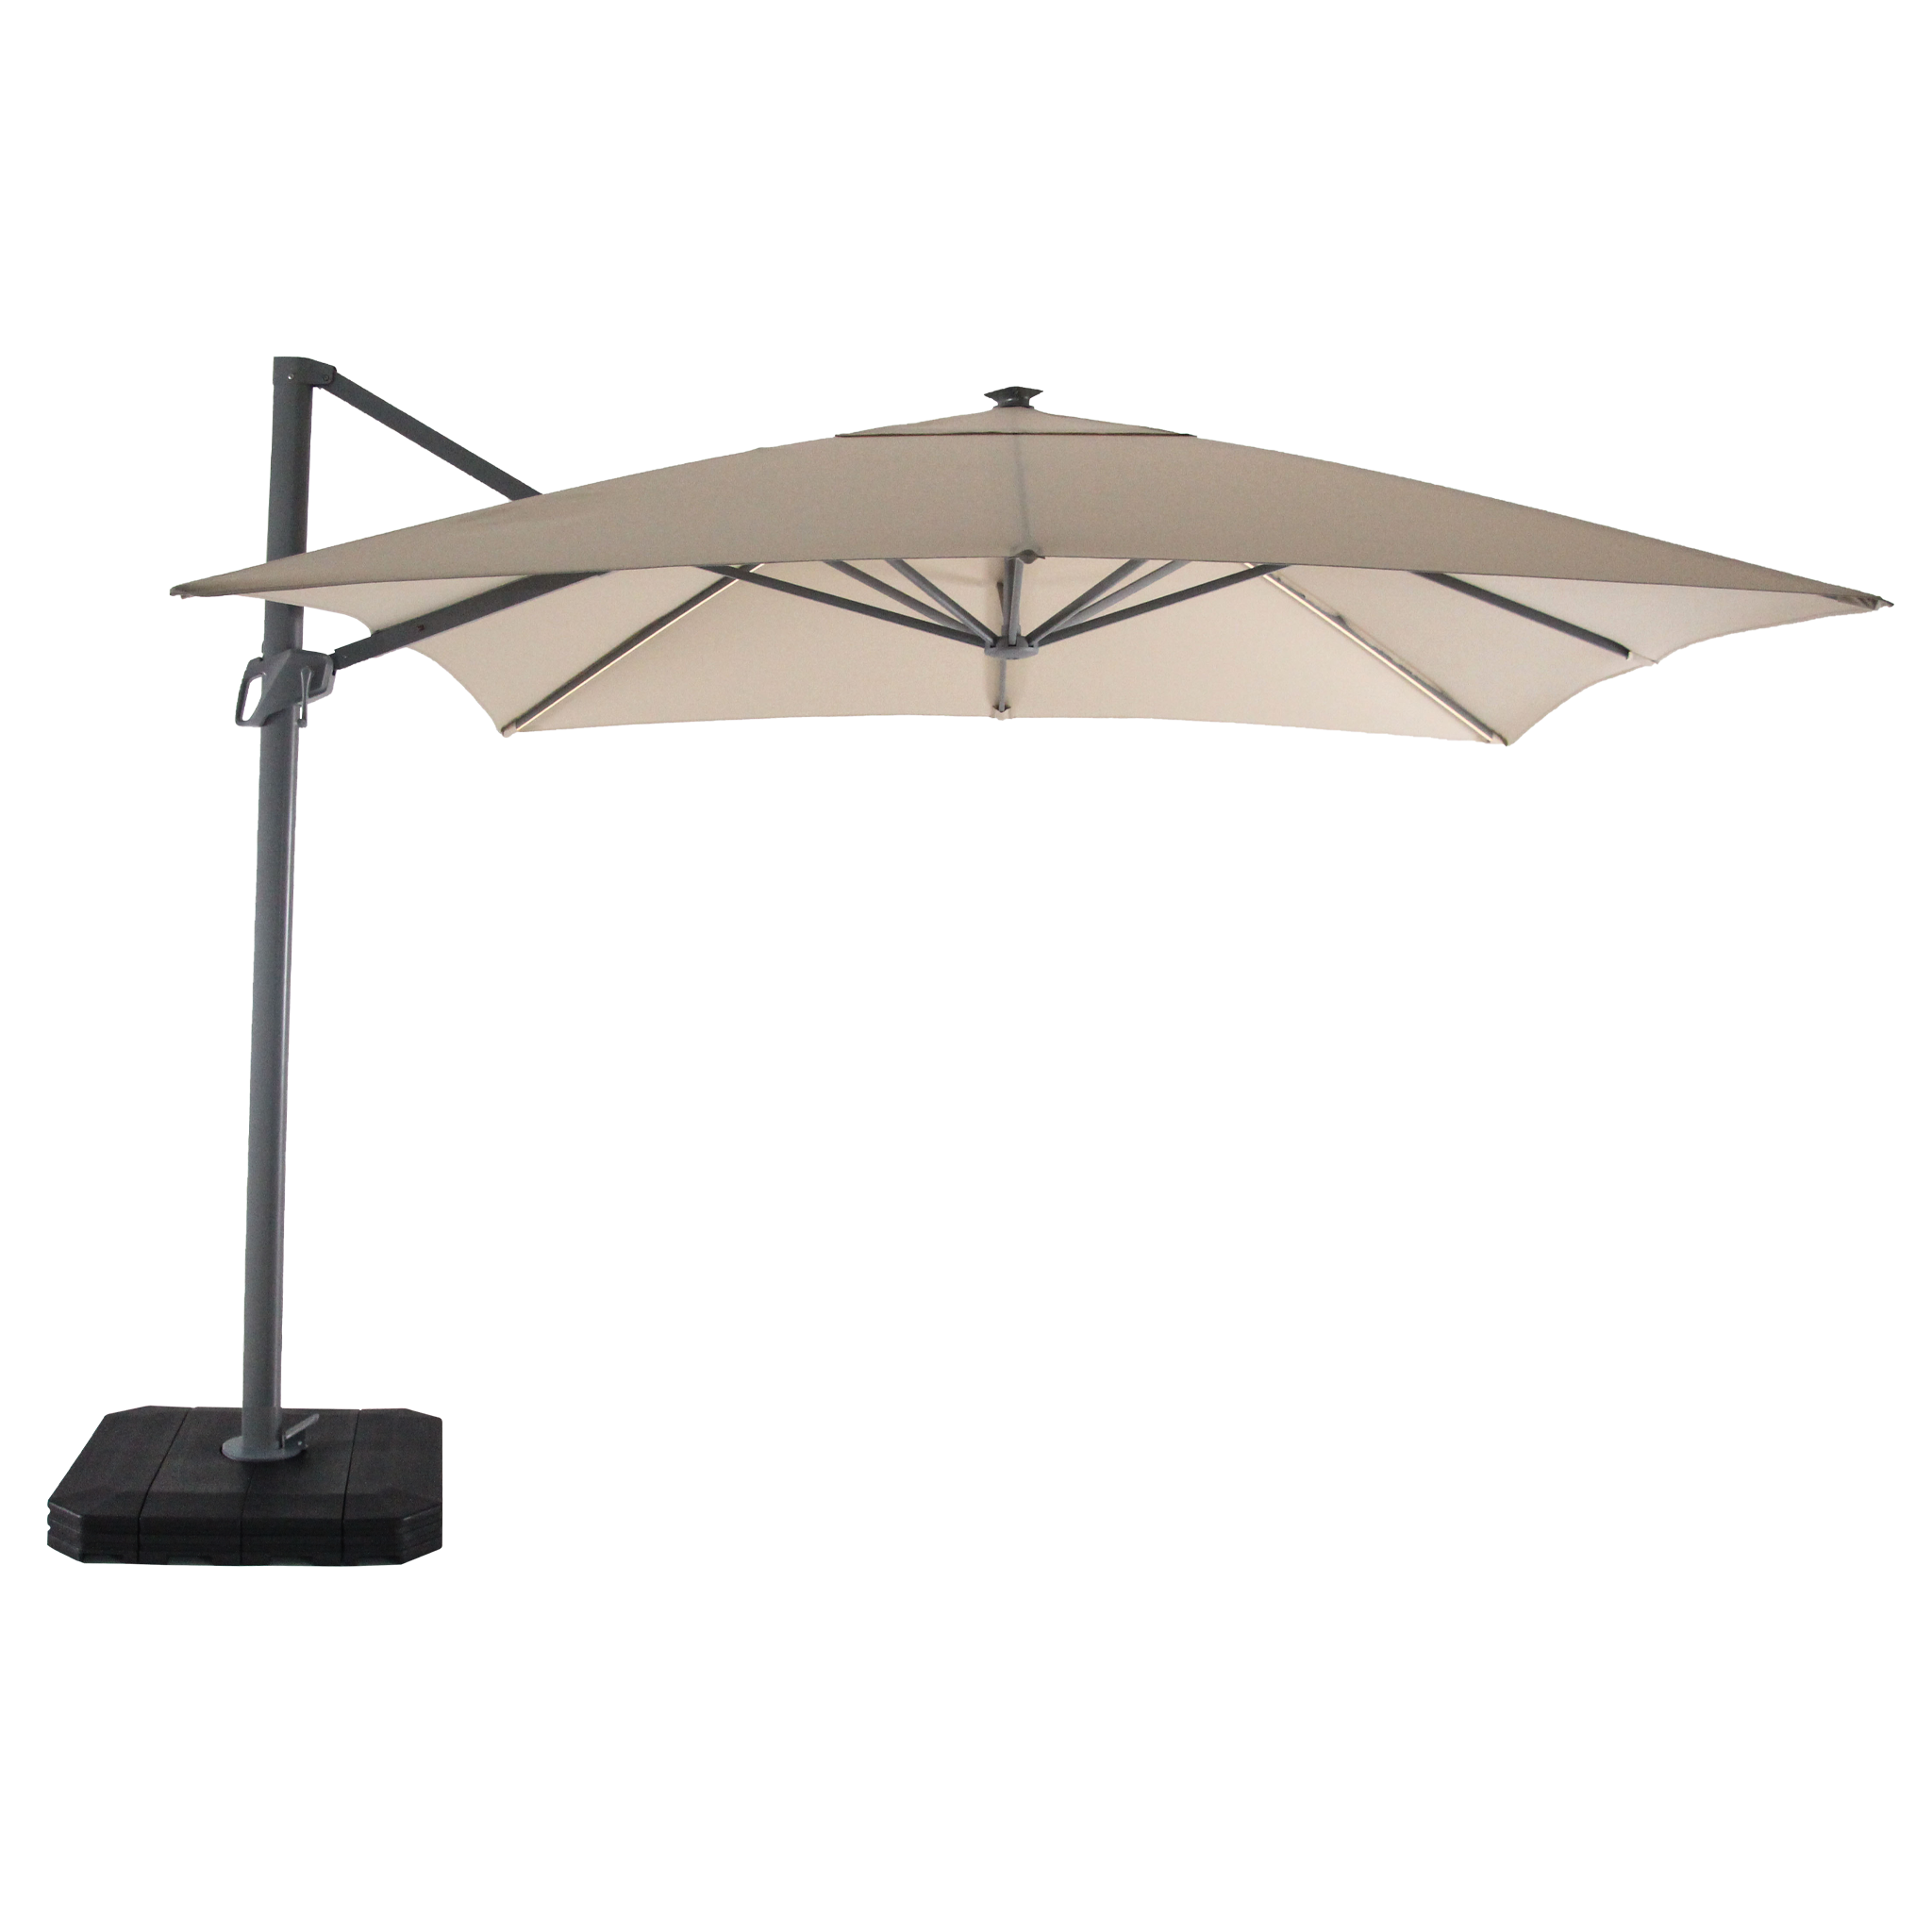 Ares 3m Square Cantilever Parasol with Solar powered LED Lights in Beige